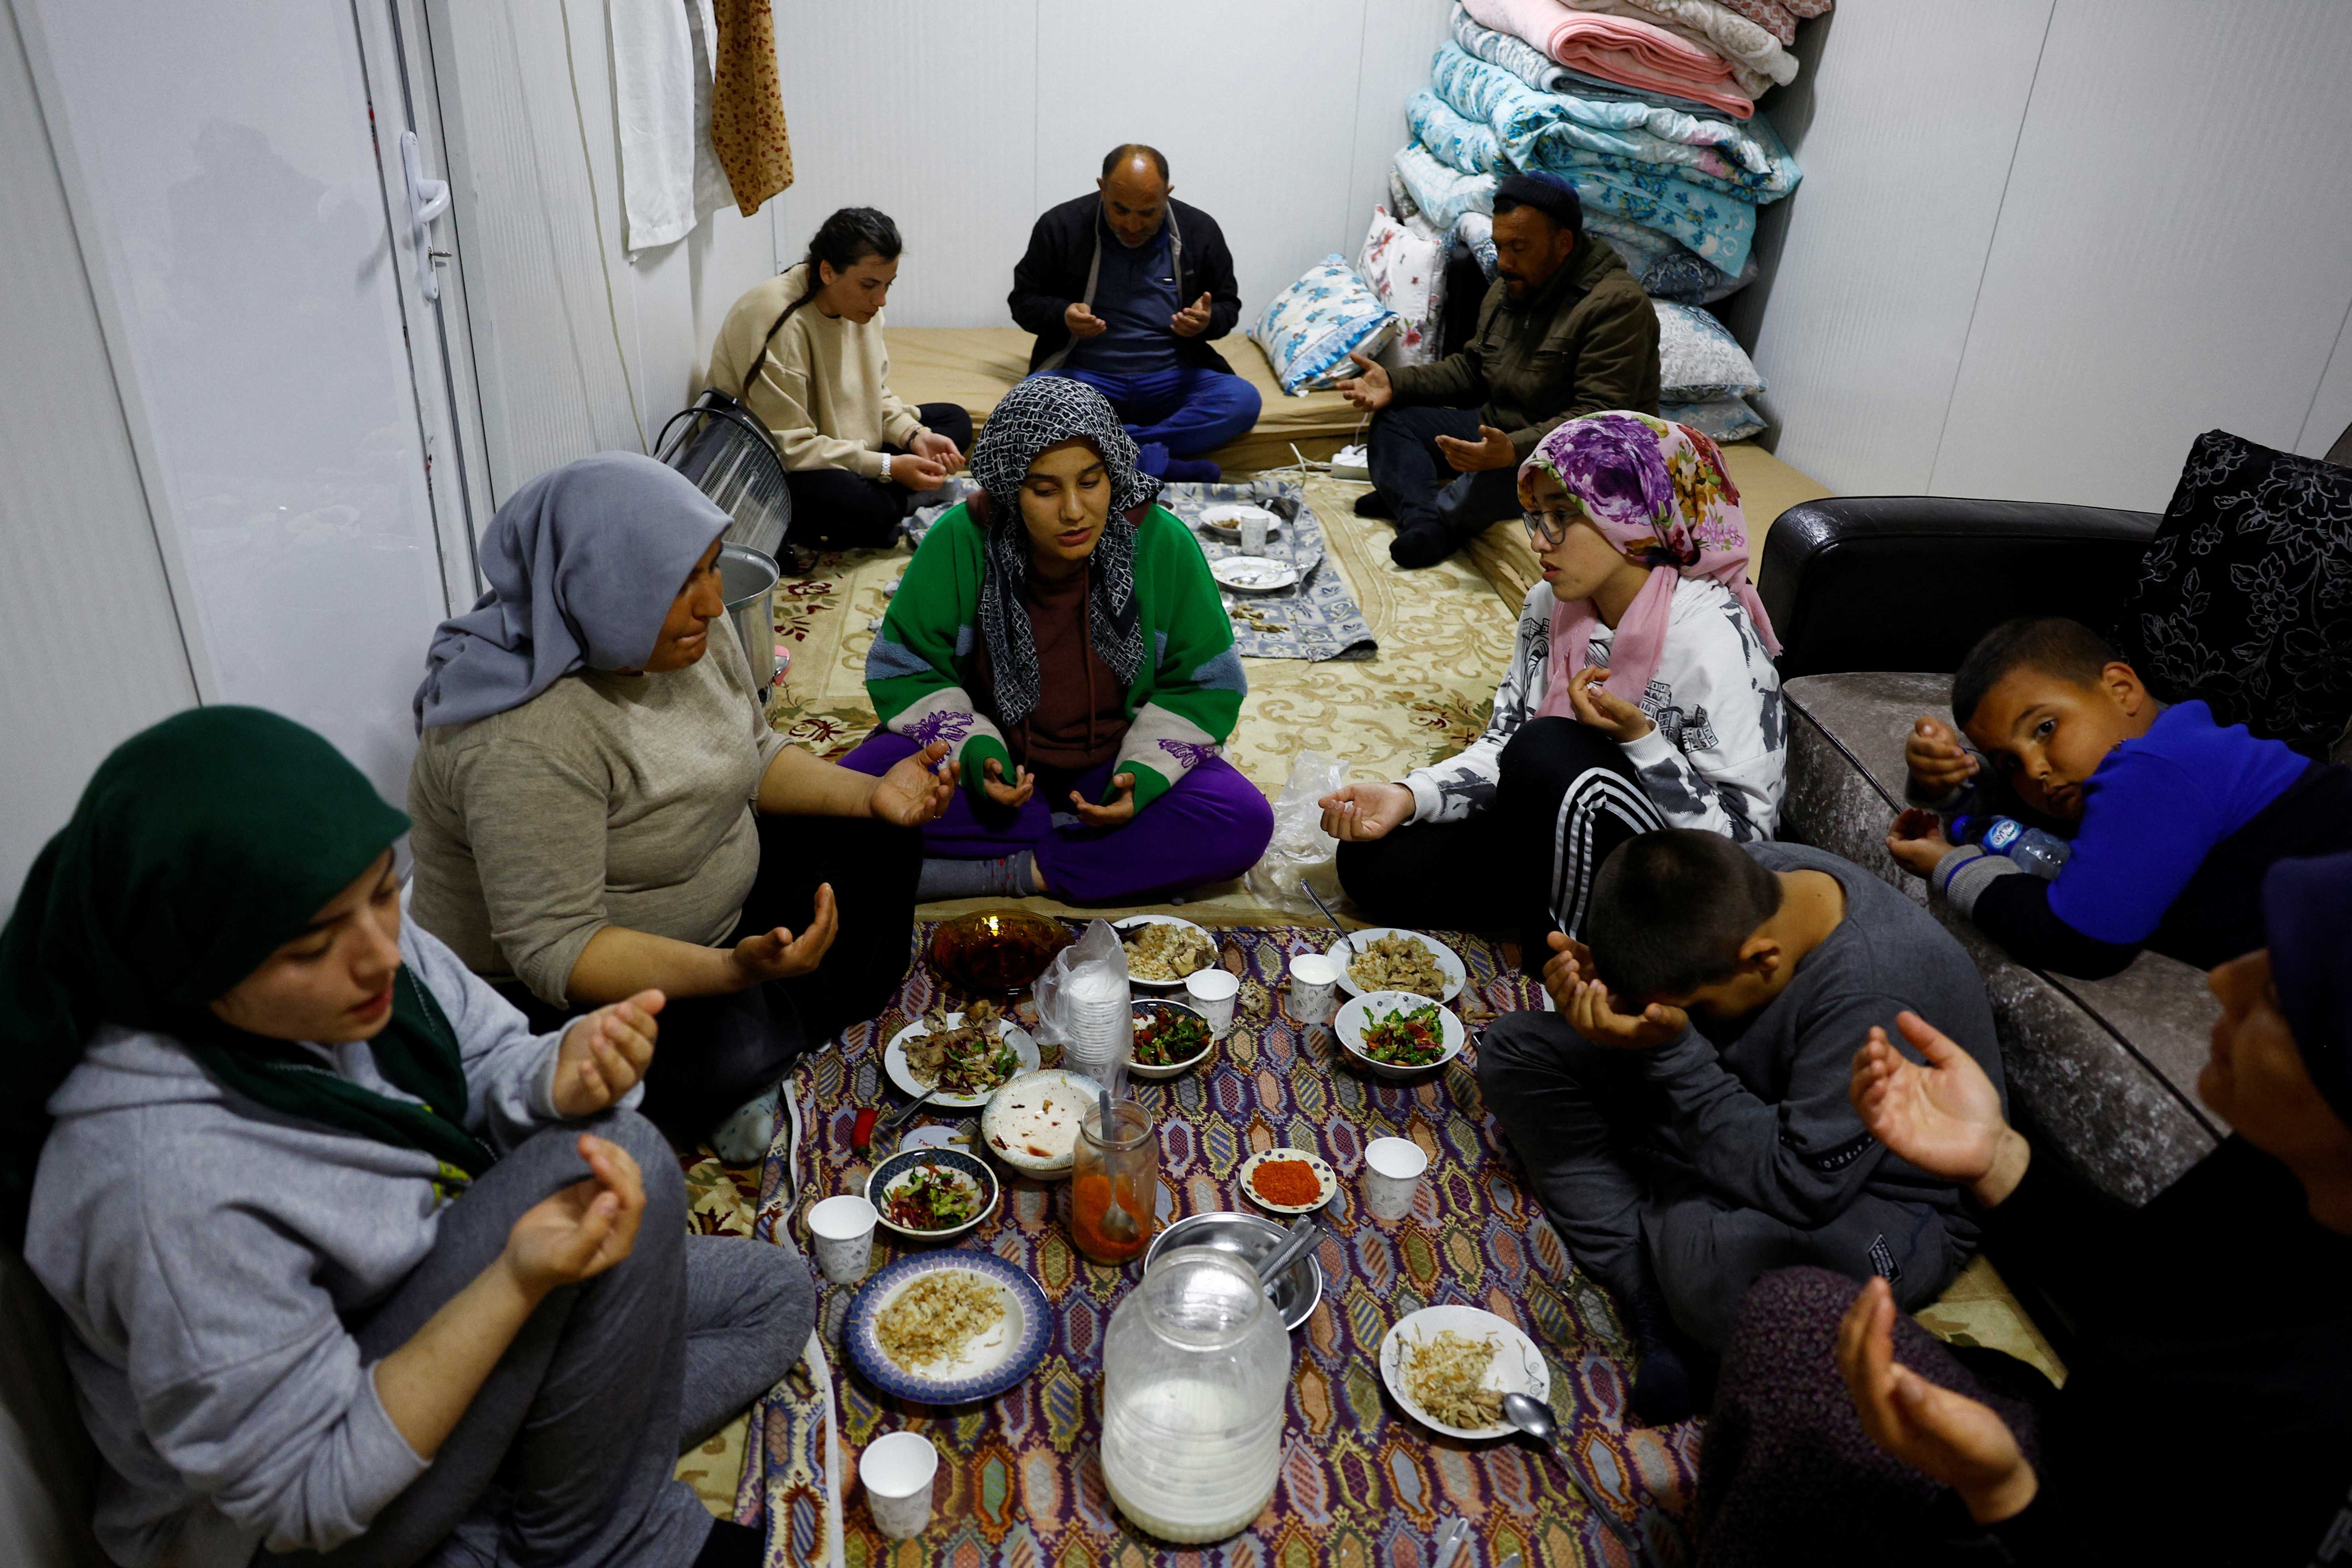 Survivors in the aftermath of the deadly earthquake in Nurdagi